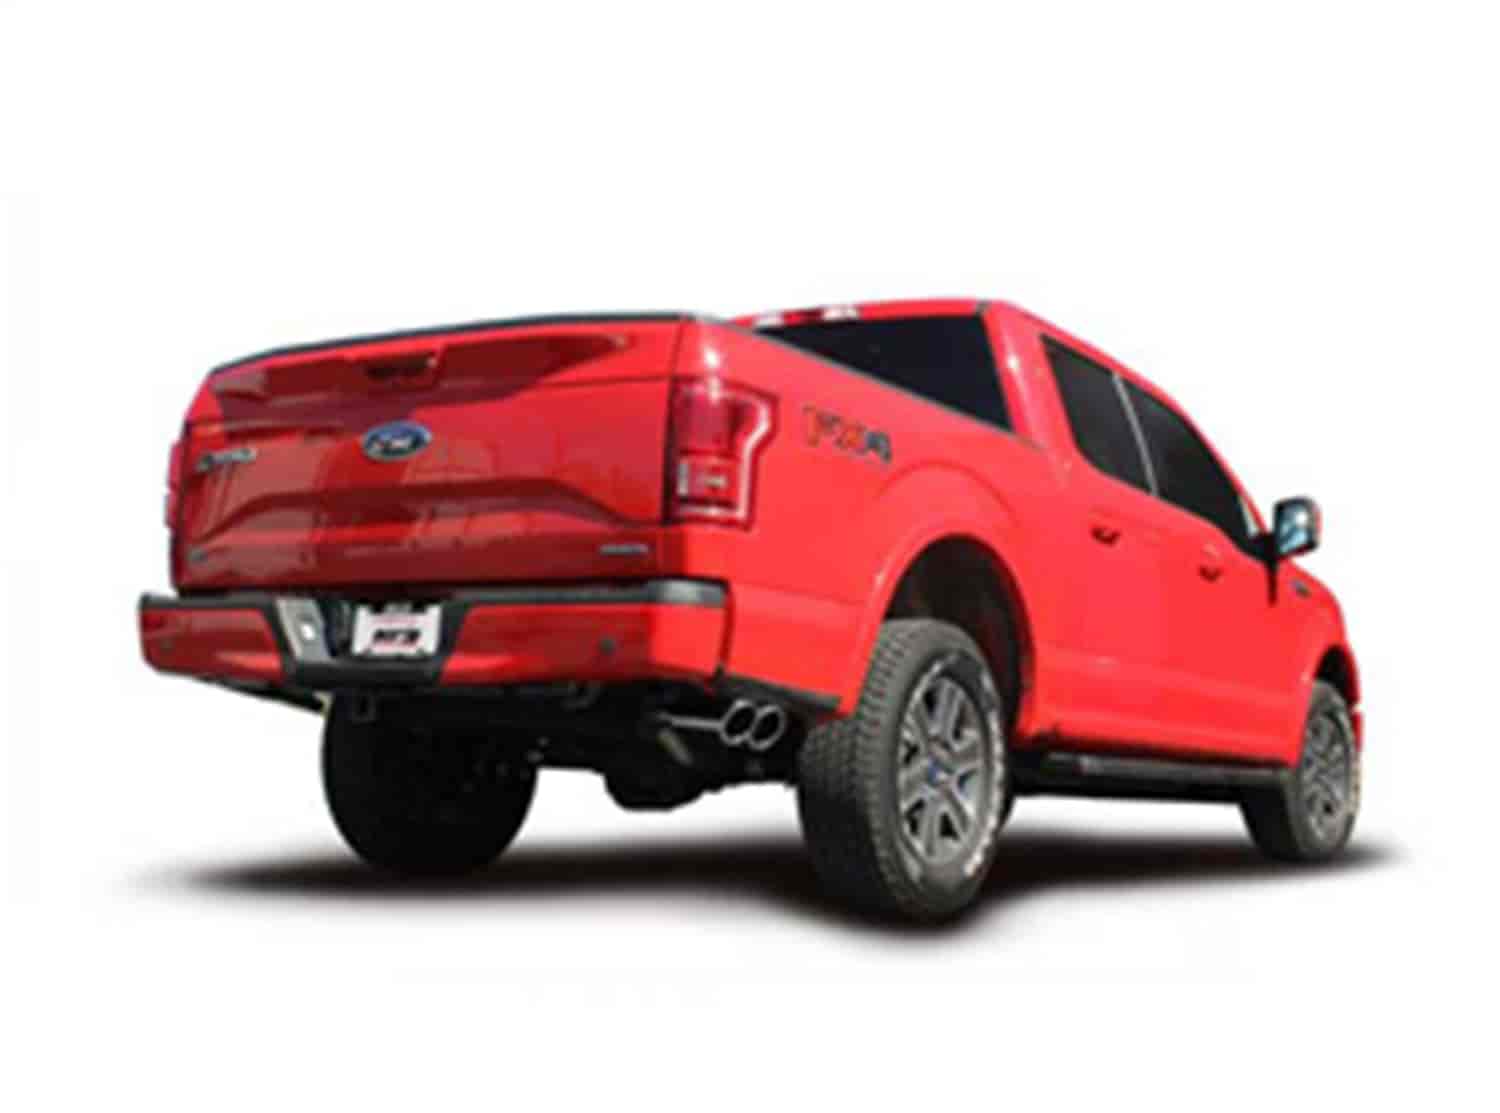 2011-2014 F-150 3.5L EcoBoost Automatic Trans 2/4 Wheel Drive Extended Cab Standard Bed Crew Cab Sho